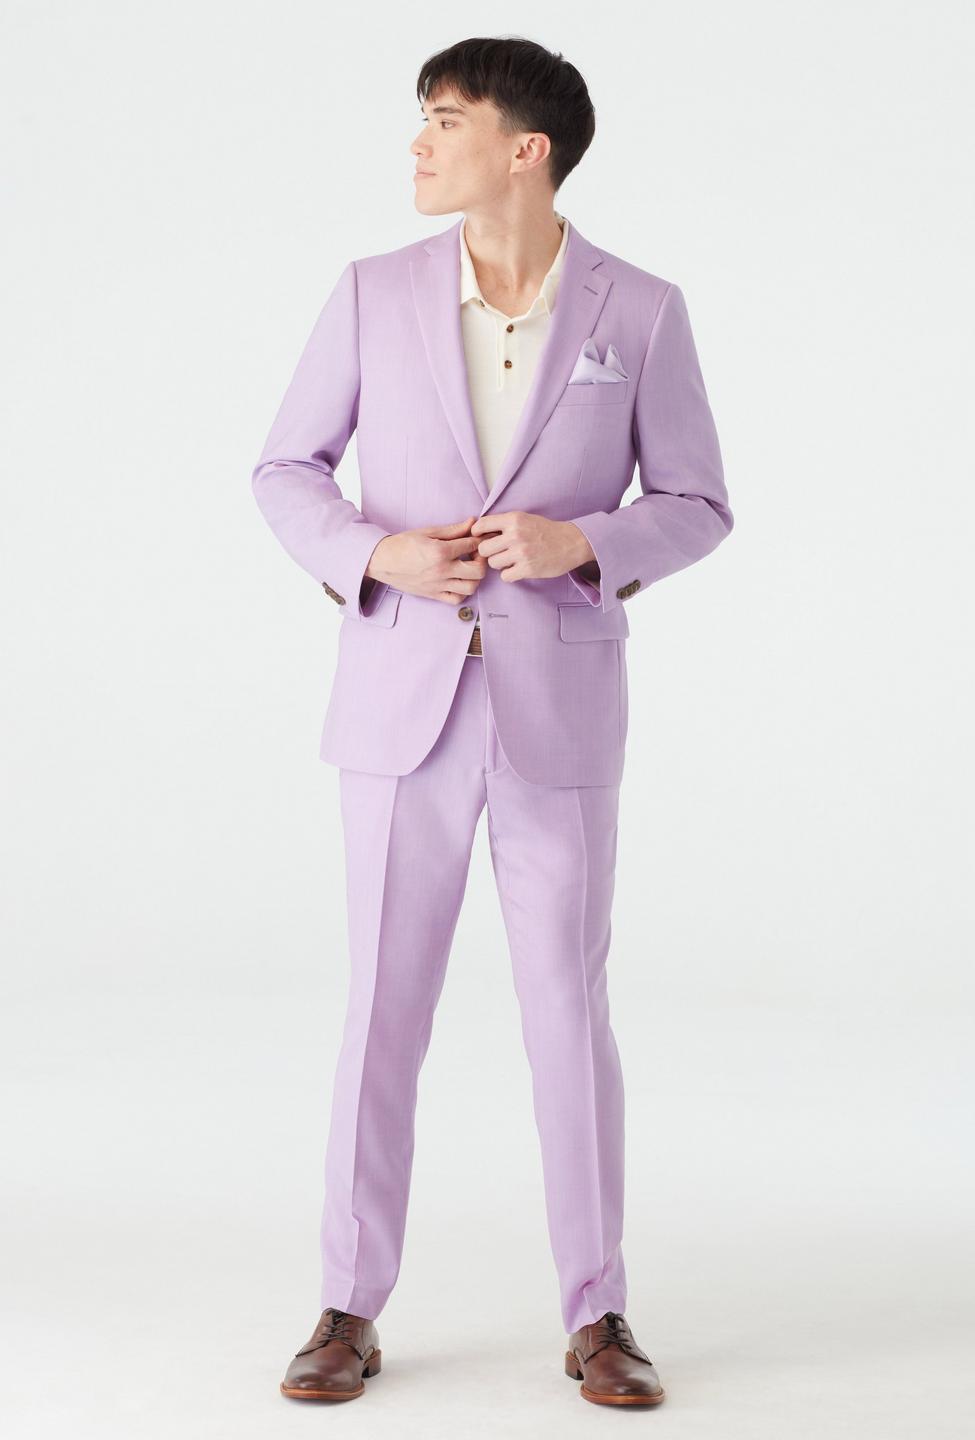 Purple suit - Solid Design from Seasonal Indochino Collection